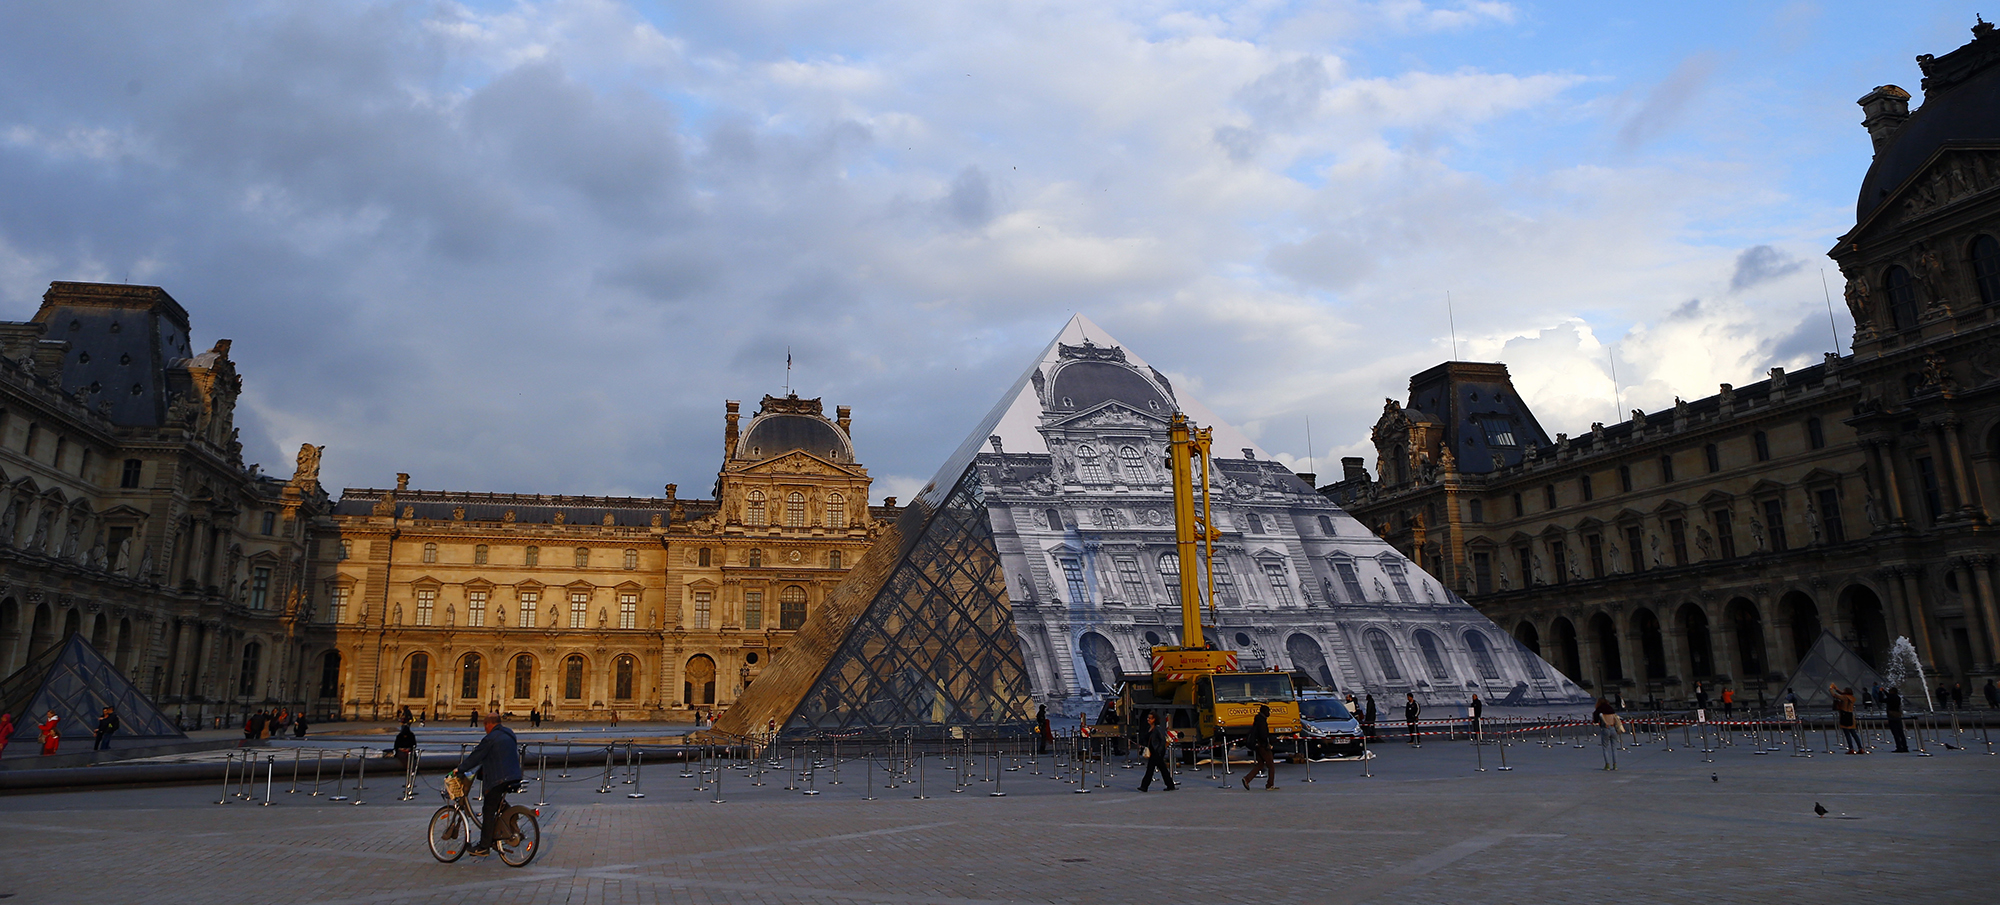 An Artist Has Made The Louvre’s Pyramid Disappear